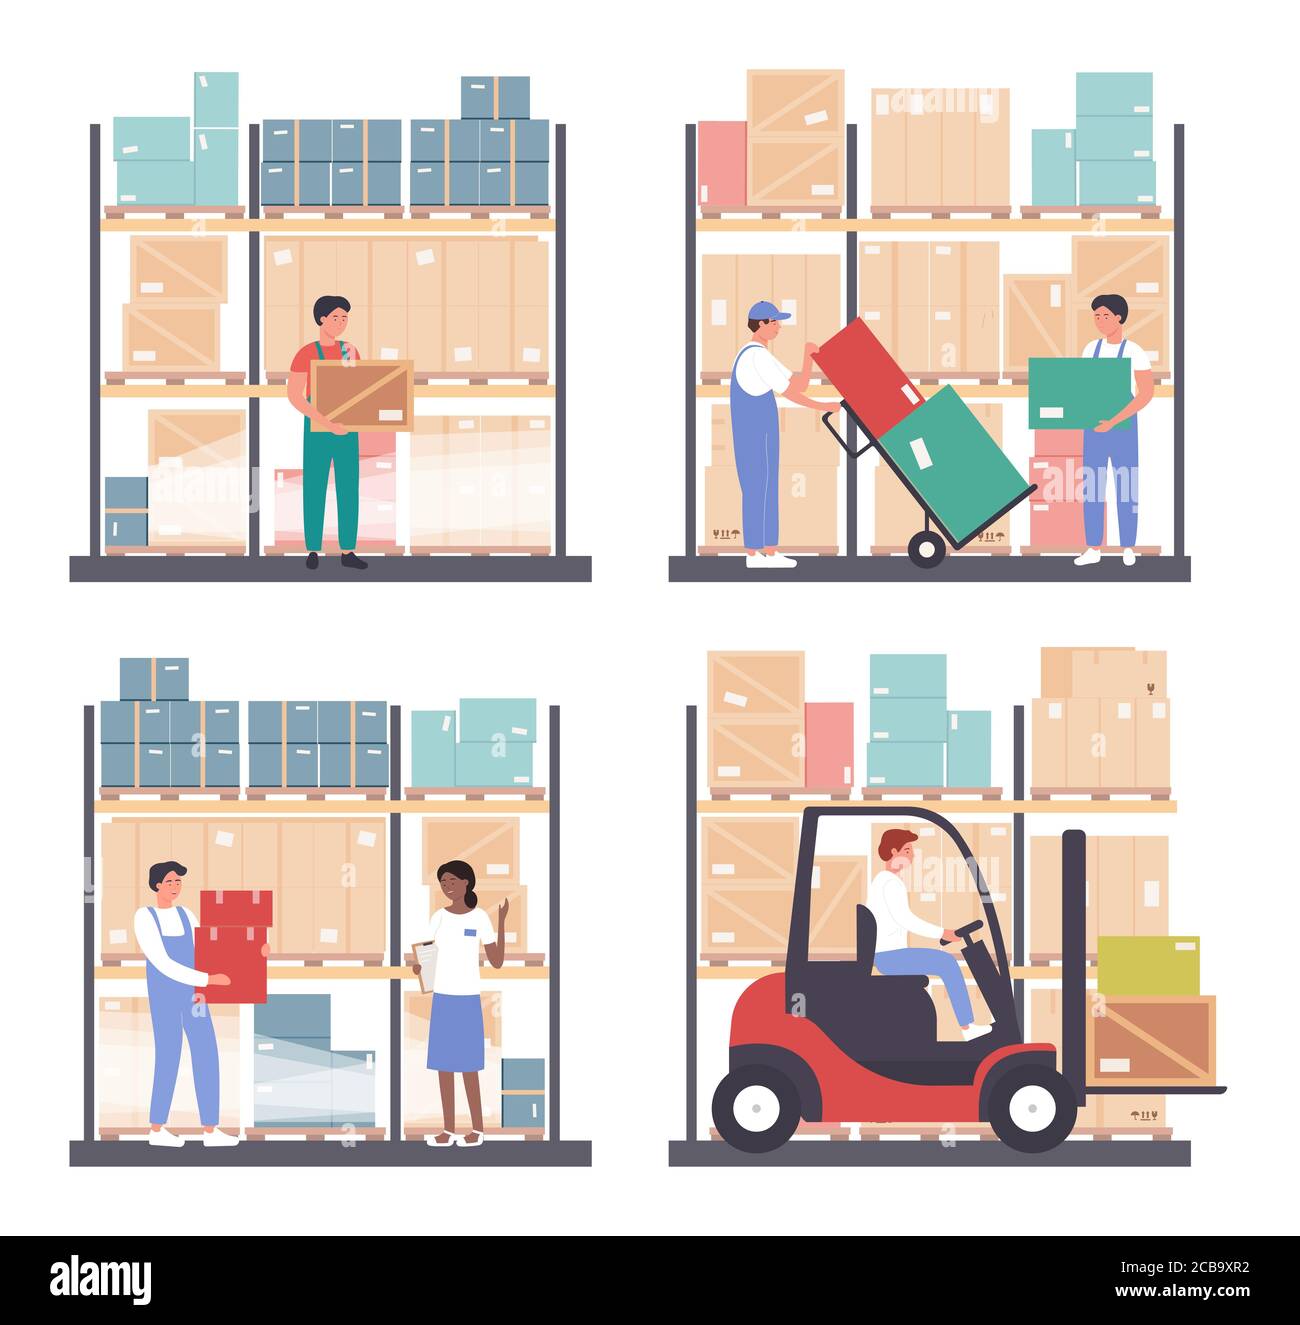 Warehouse logistics vector illustration set. Cartoon flat worker people work in wholesale stockroom of storehouse, carry boxes, transport and load packages with stock forklift loader isolated on white Stock Vector